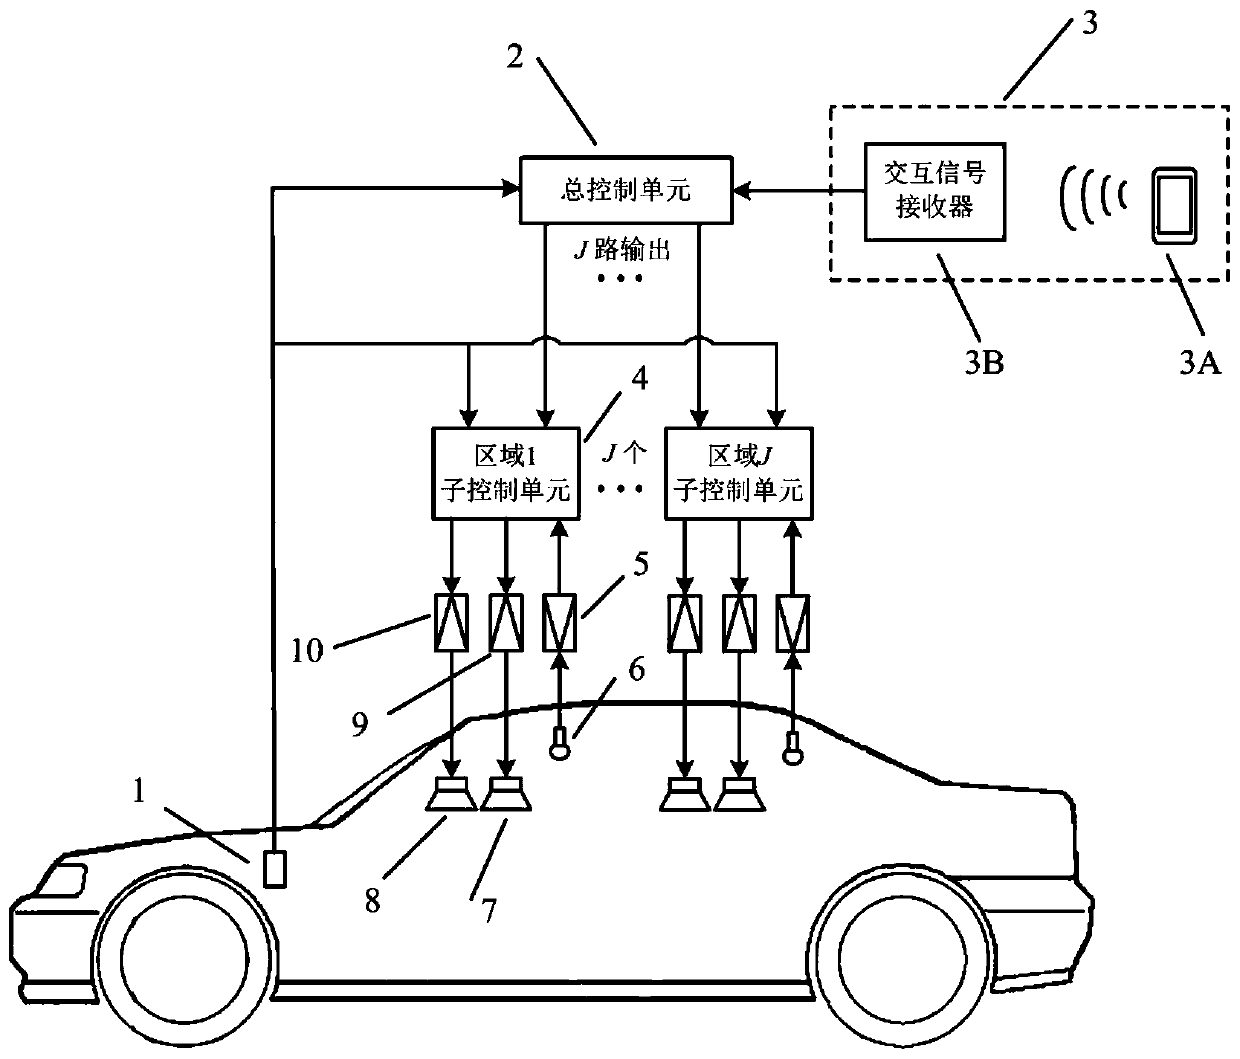 Regional personalized automobile active noise control system